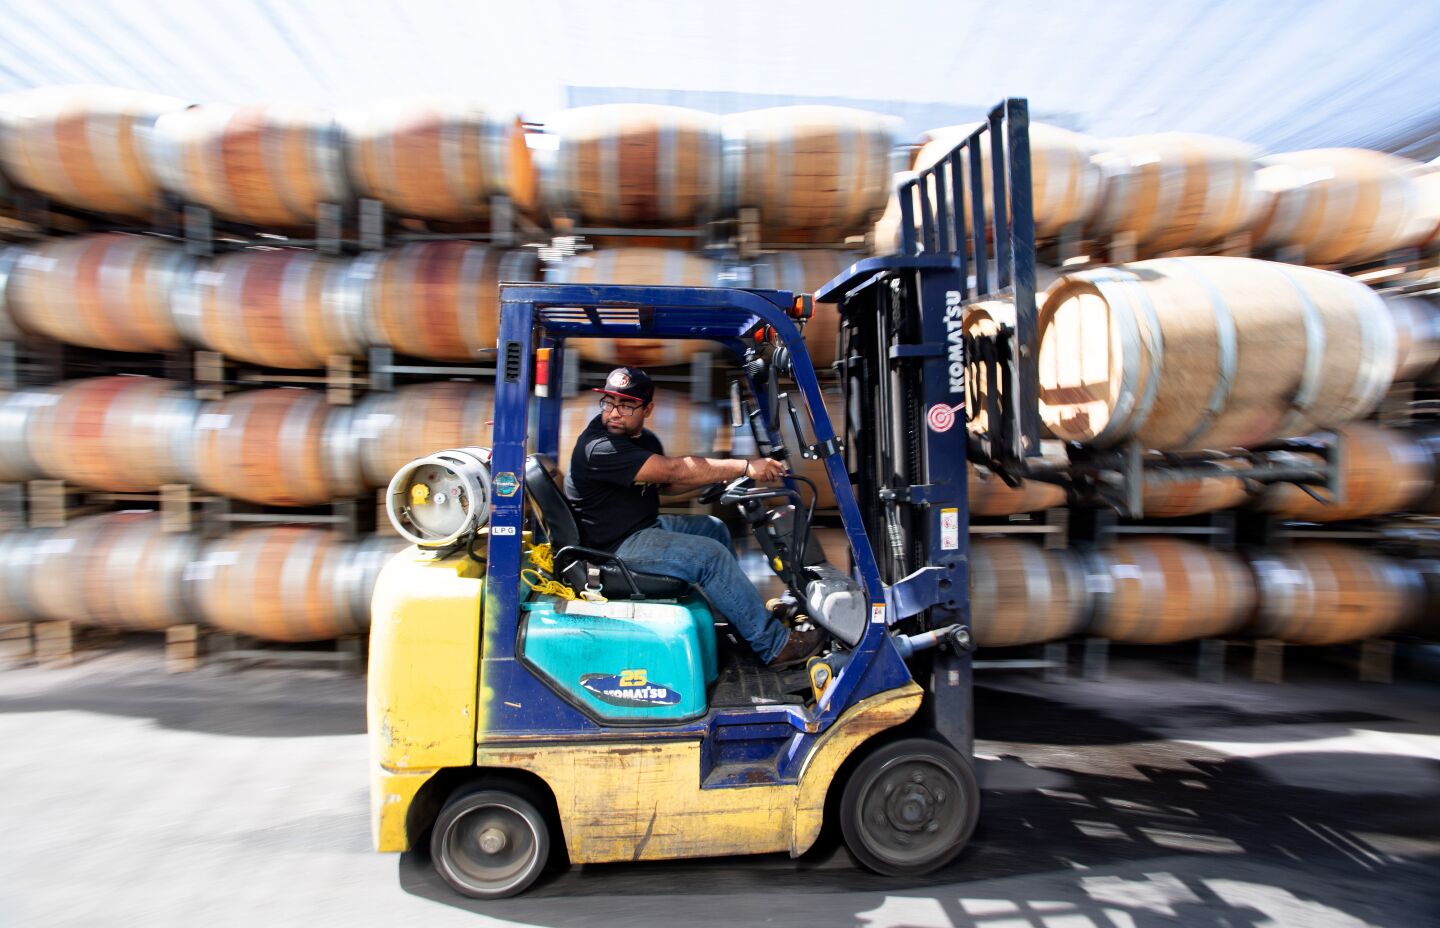 Samuel Garcia moves barrels of wine in a forklift at Alexander Valley Vineyards. The winery shipped 175,000 cases last year, mostly in the U.S.